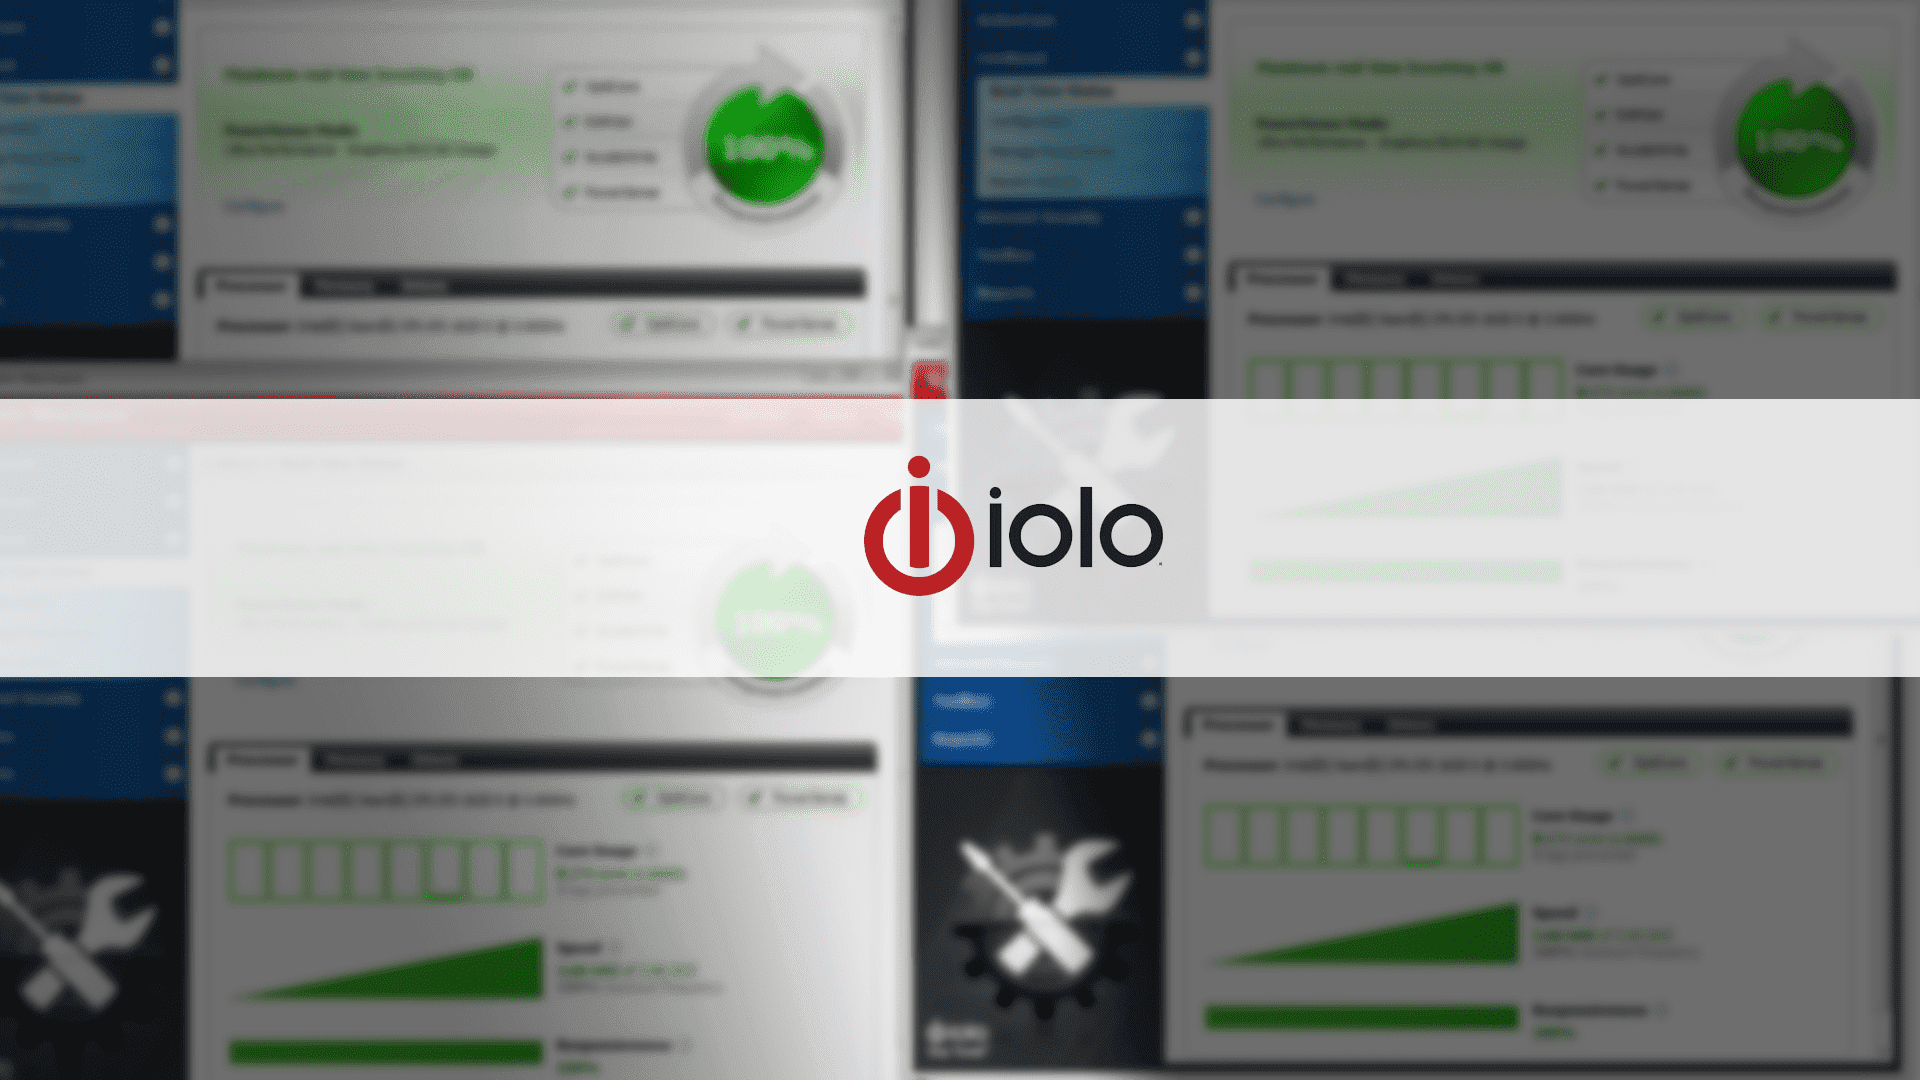 iolo system mechanic, free software, improve computer performance